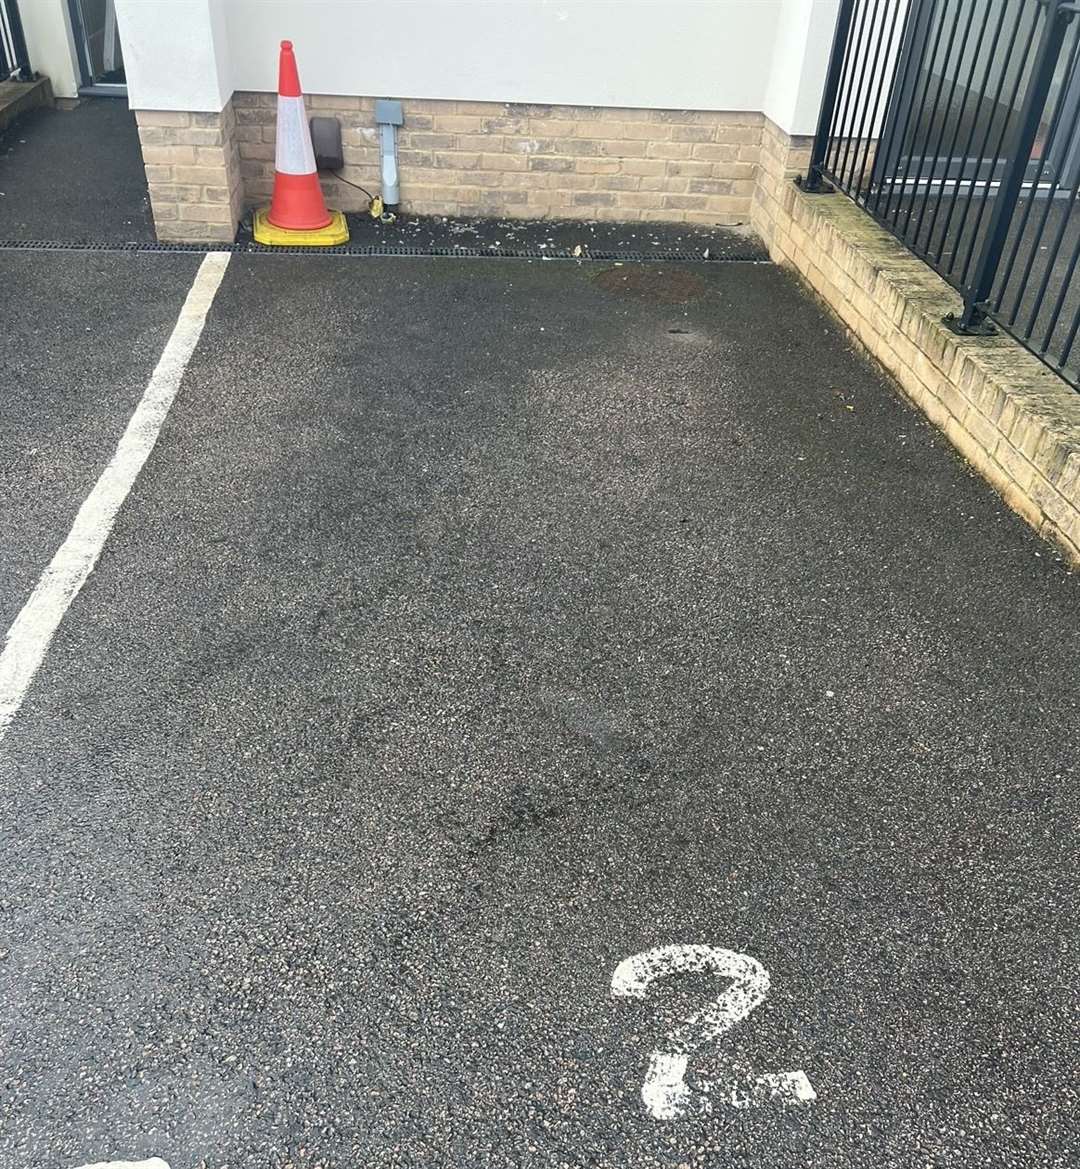 The man's allotted parking space at the flats